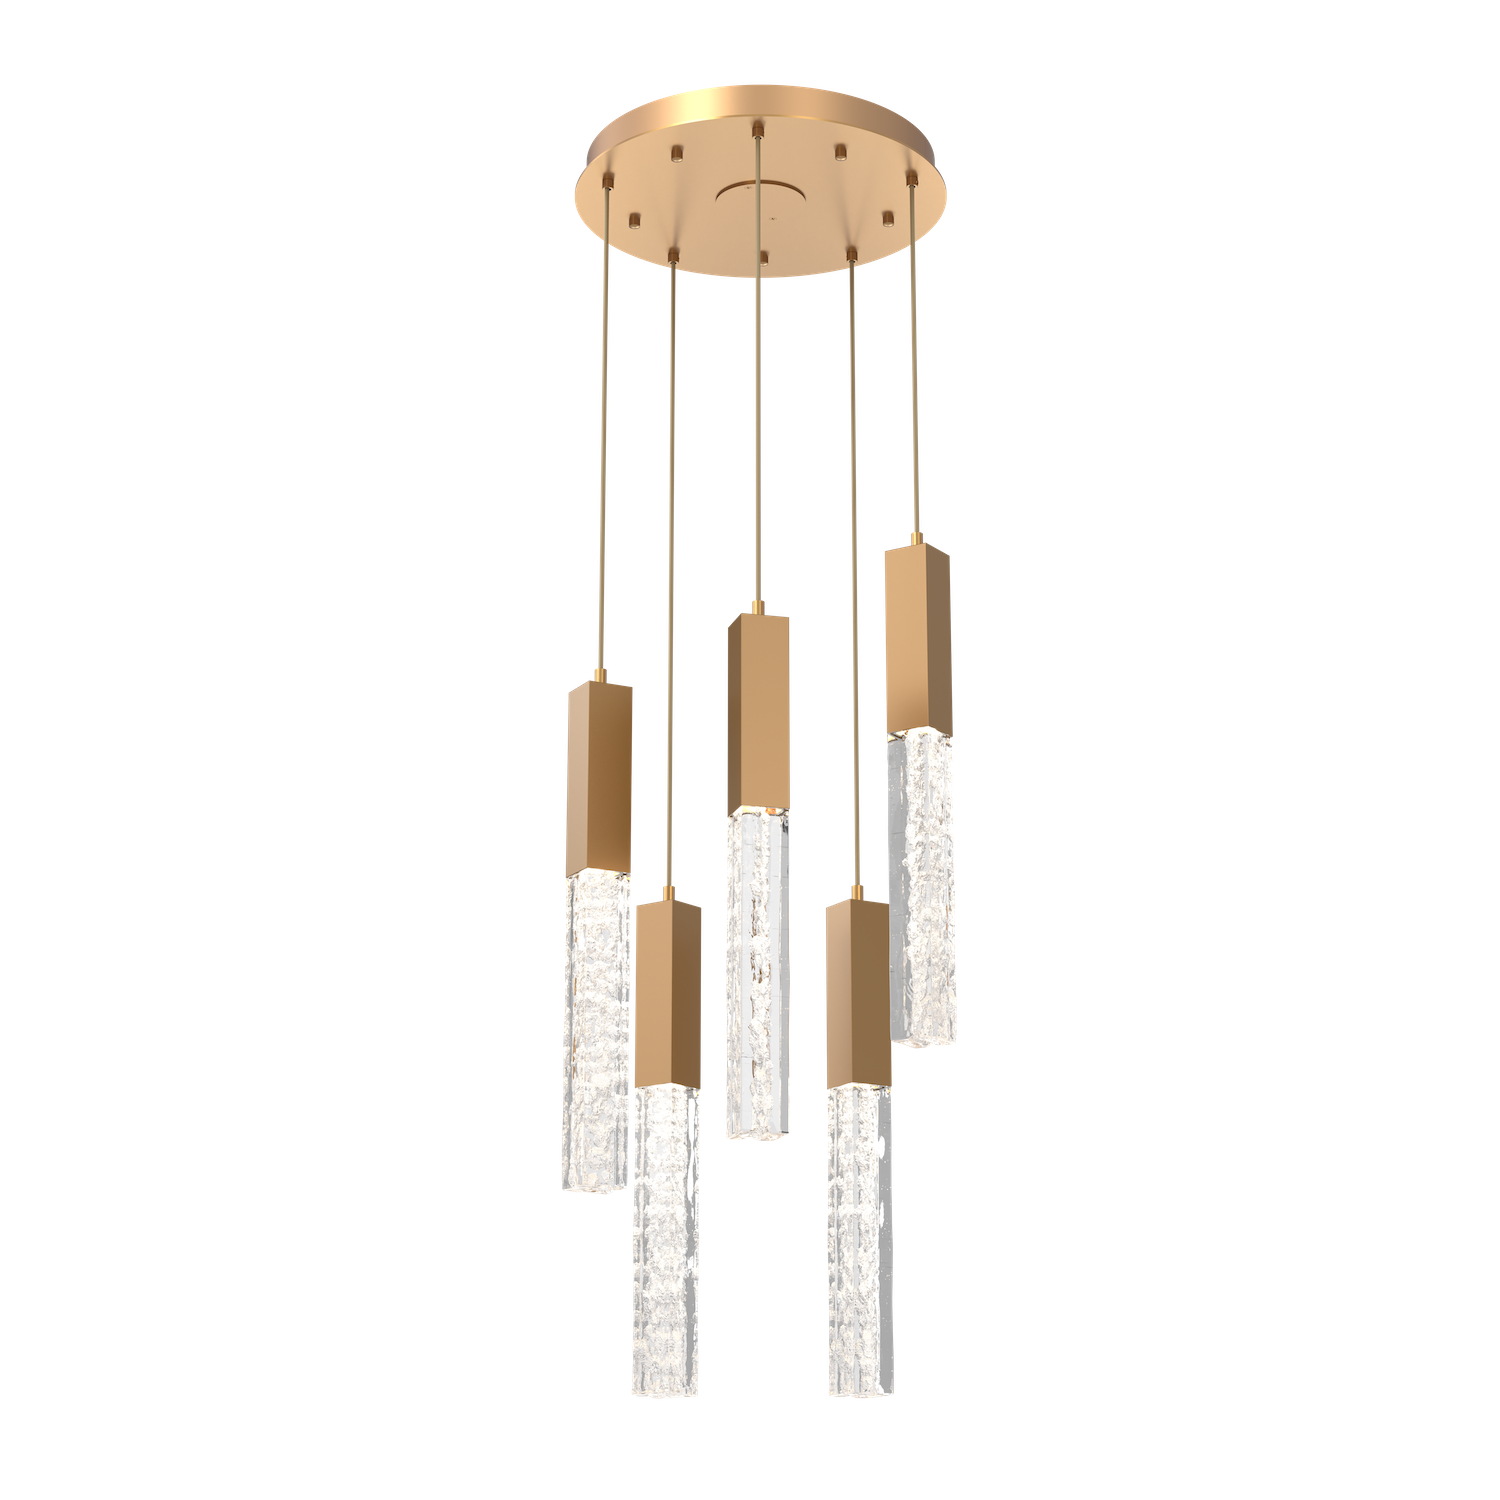 CHB0060-05-NB-GC-Hammerton-Studio-Axis-5-Light-Pendant-Chandelier-with-Novel-Brass-finish-and-clear-cast-glass-and-LED-lamping